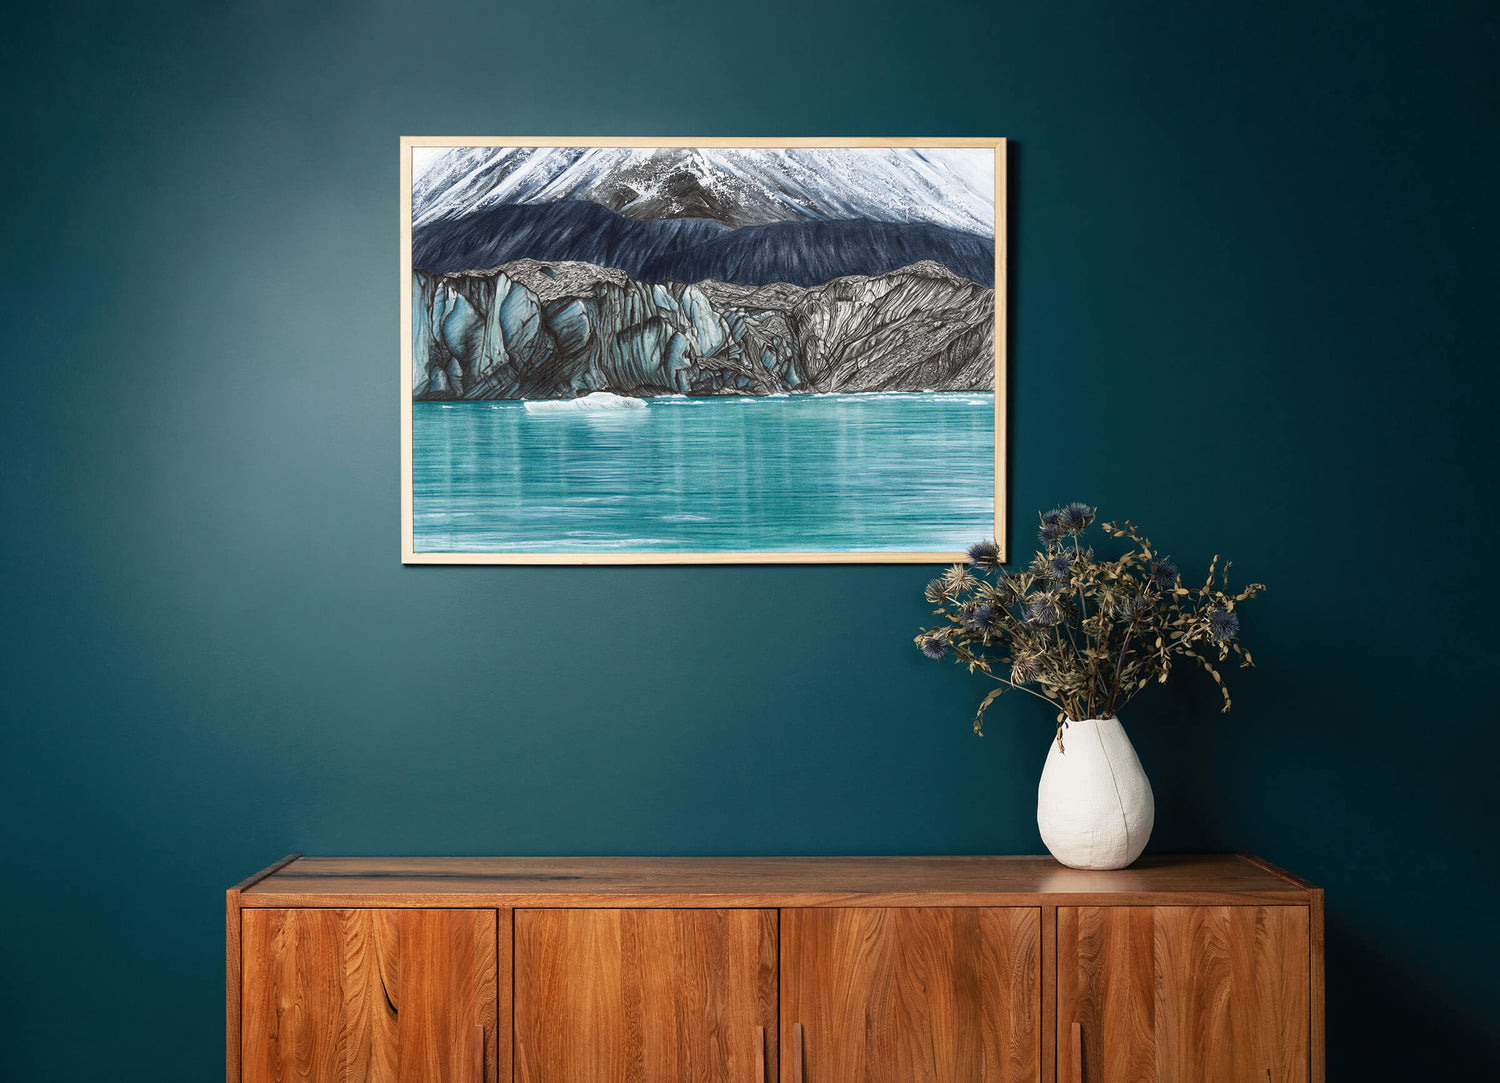 Original art, titled Fragment, by Australian artist, Hayley Byron, created in graphite, watercolour and gouache on fine art paper. The drawing is a depiction of the Tasman Glacier and icebergs. This image features the artwork on a wall in an interior room